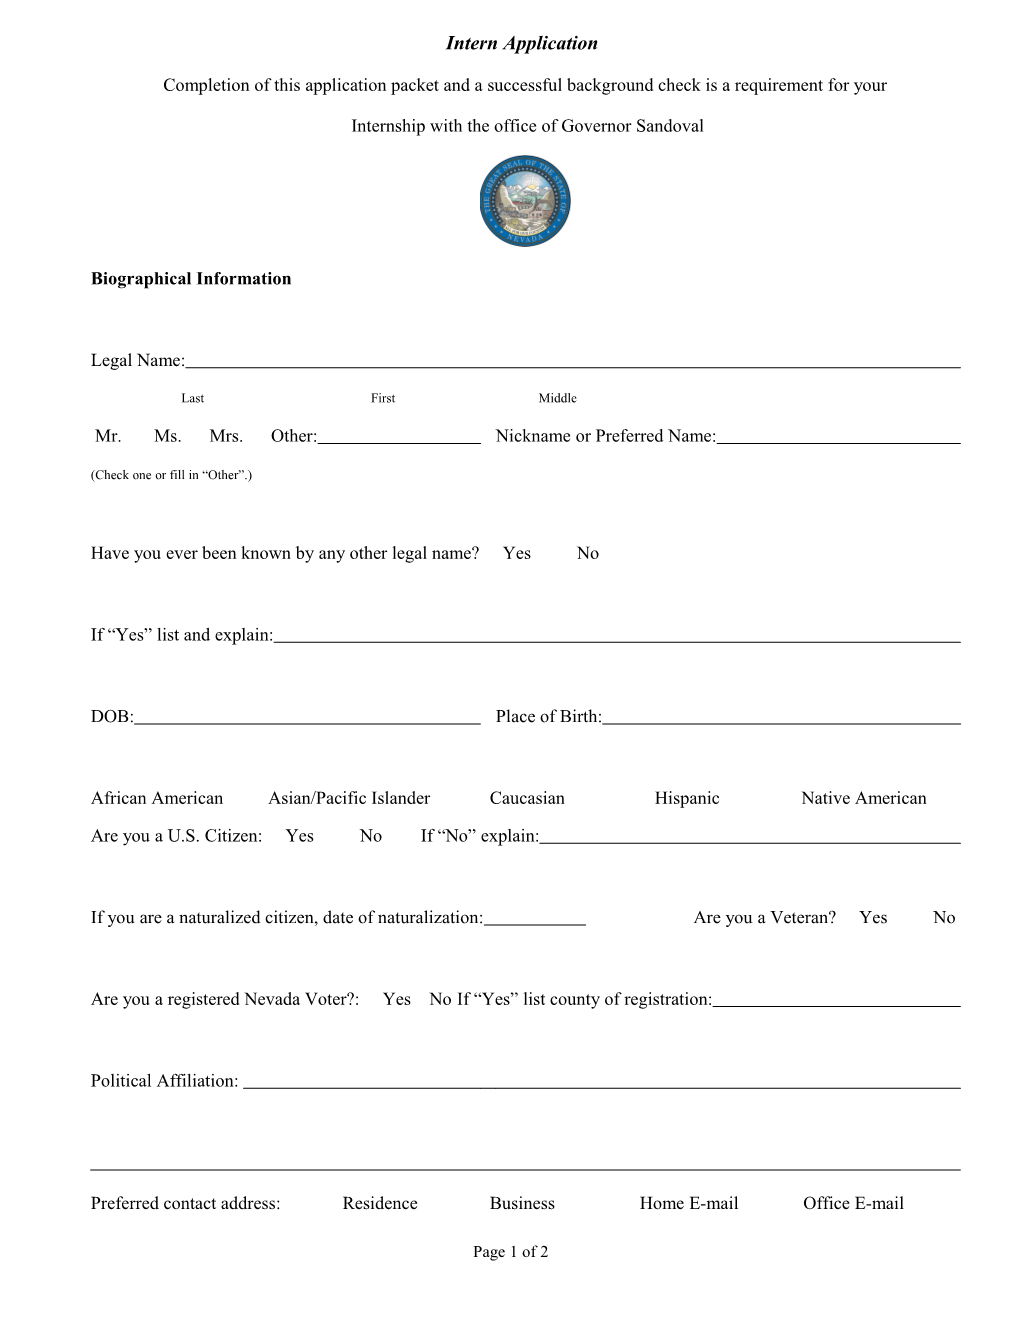 Application for Appointment to Position of Trust